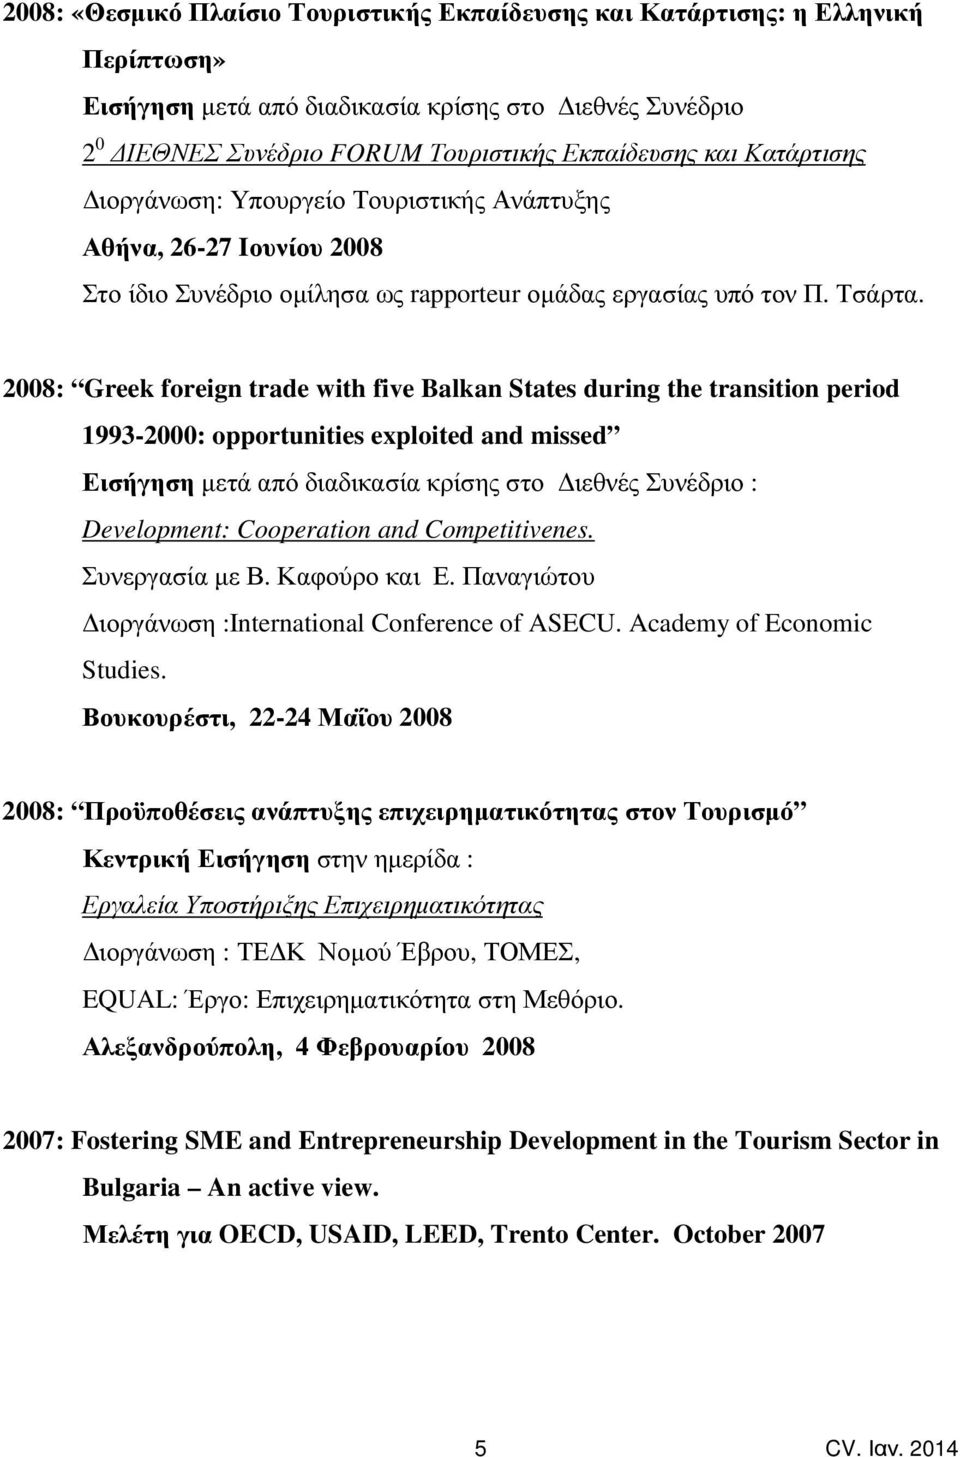 2008: Greek foreign trade with five Balkan States during the transition period 1993-2000: opportunities exploited and missed Εισήγηση µετά από διαδικασία κρίσης στο ιεθνές Συνέδριο : Development: